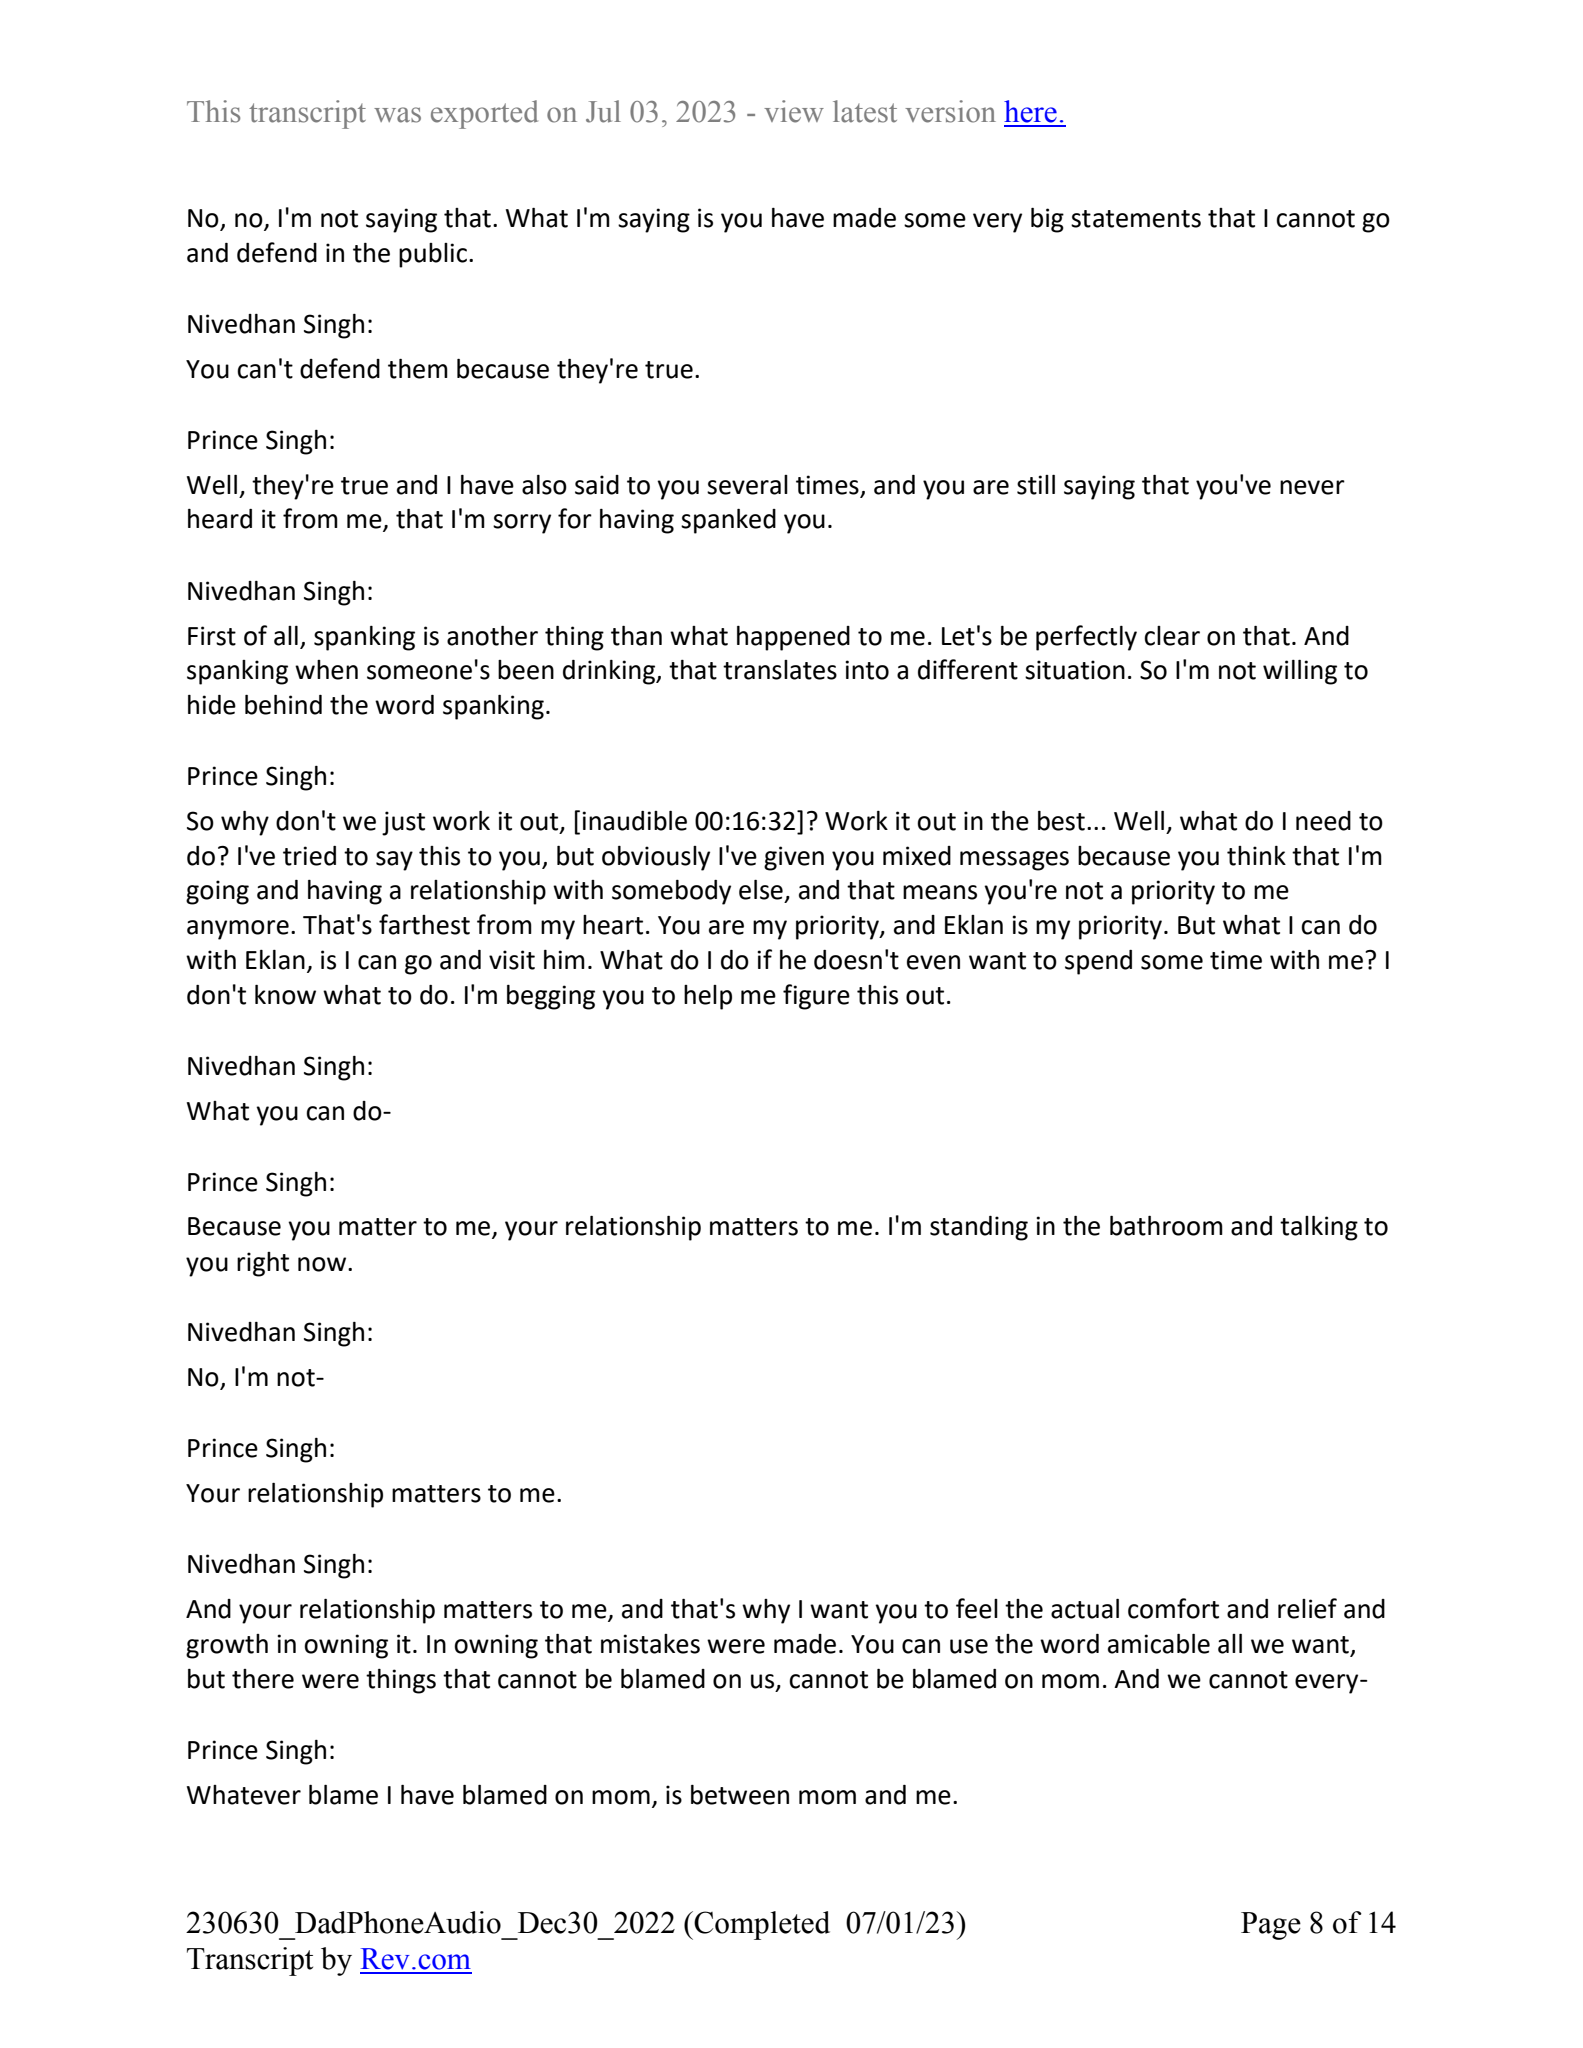 December 30th, 2022 phone call transcript - Page 8